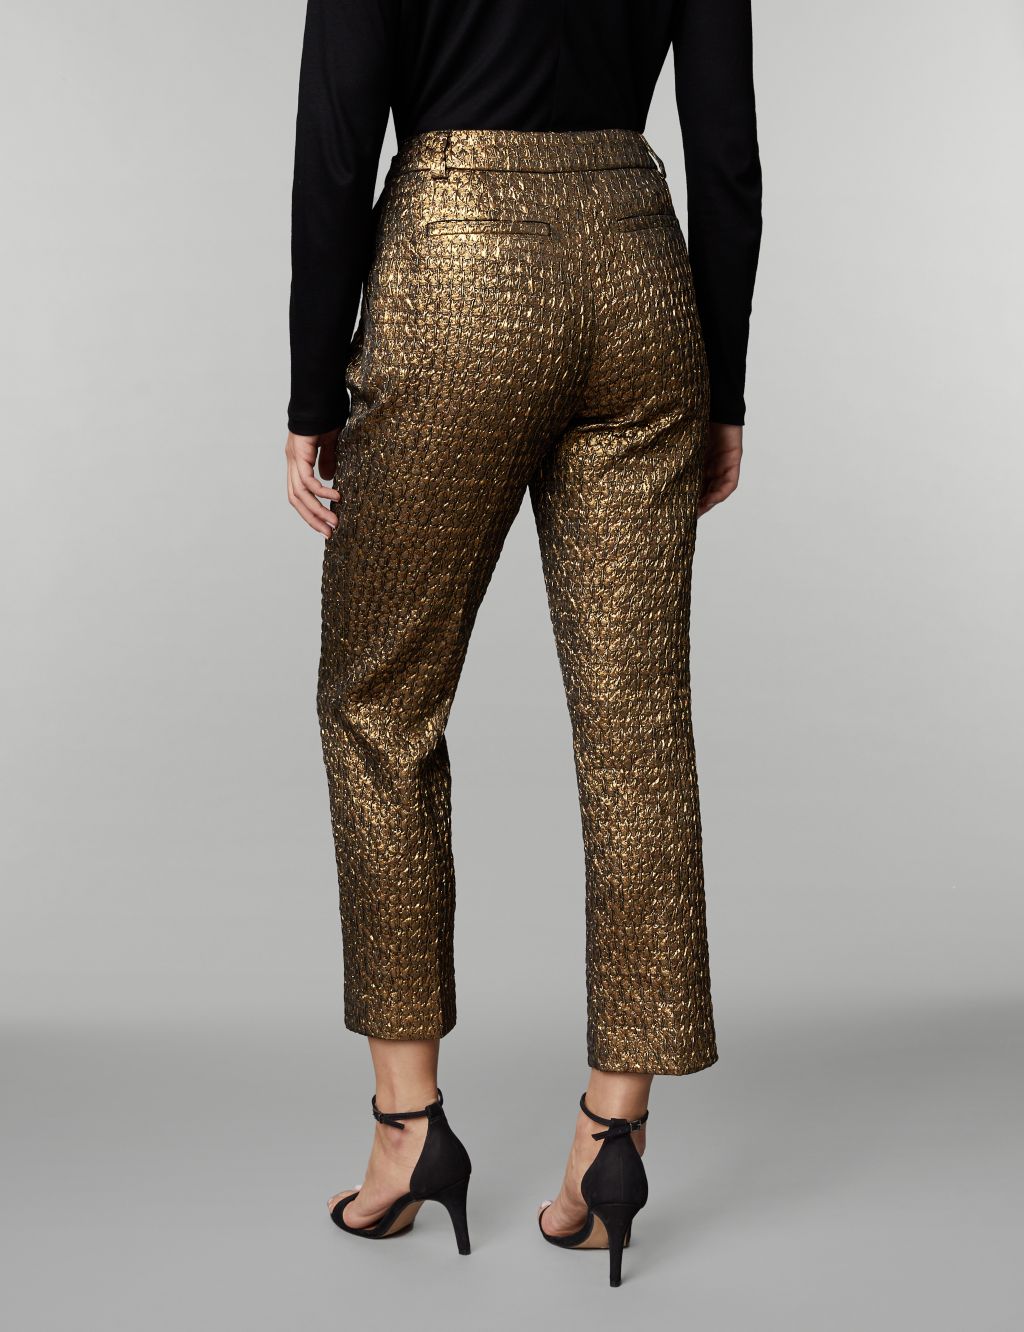 Jacquard Straight Leg Cropped Trousers image 5